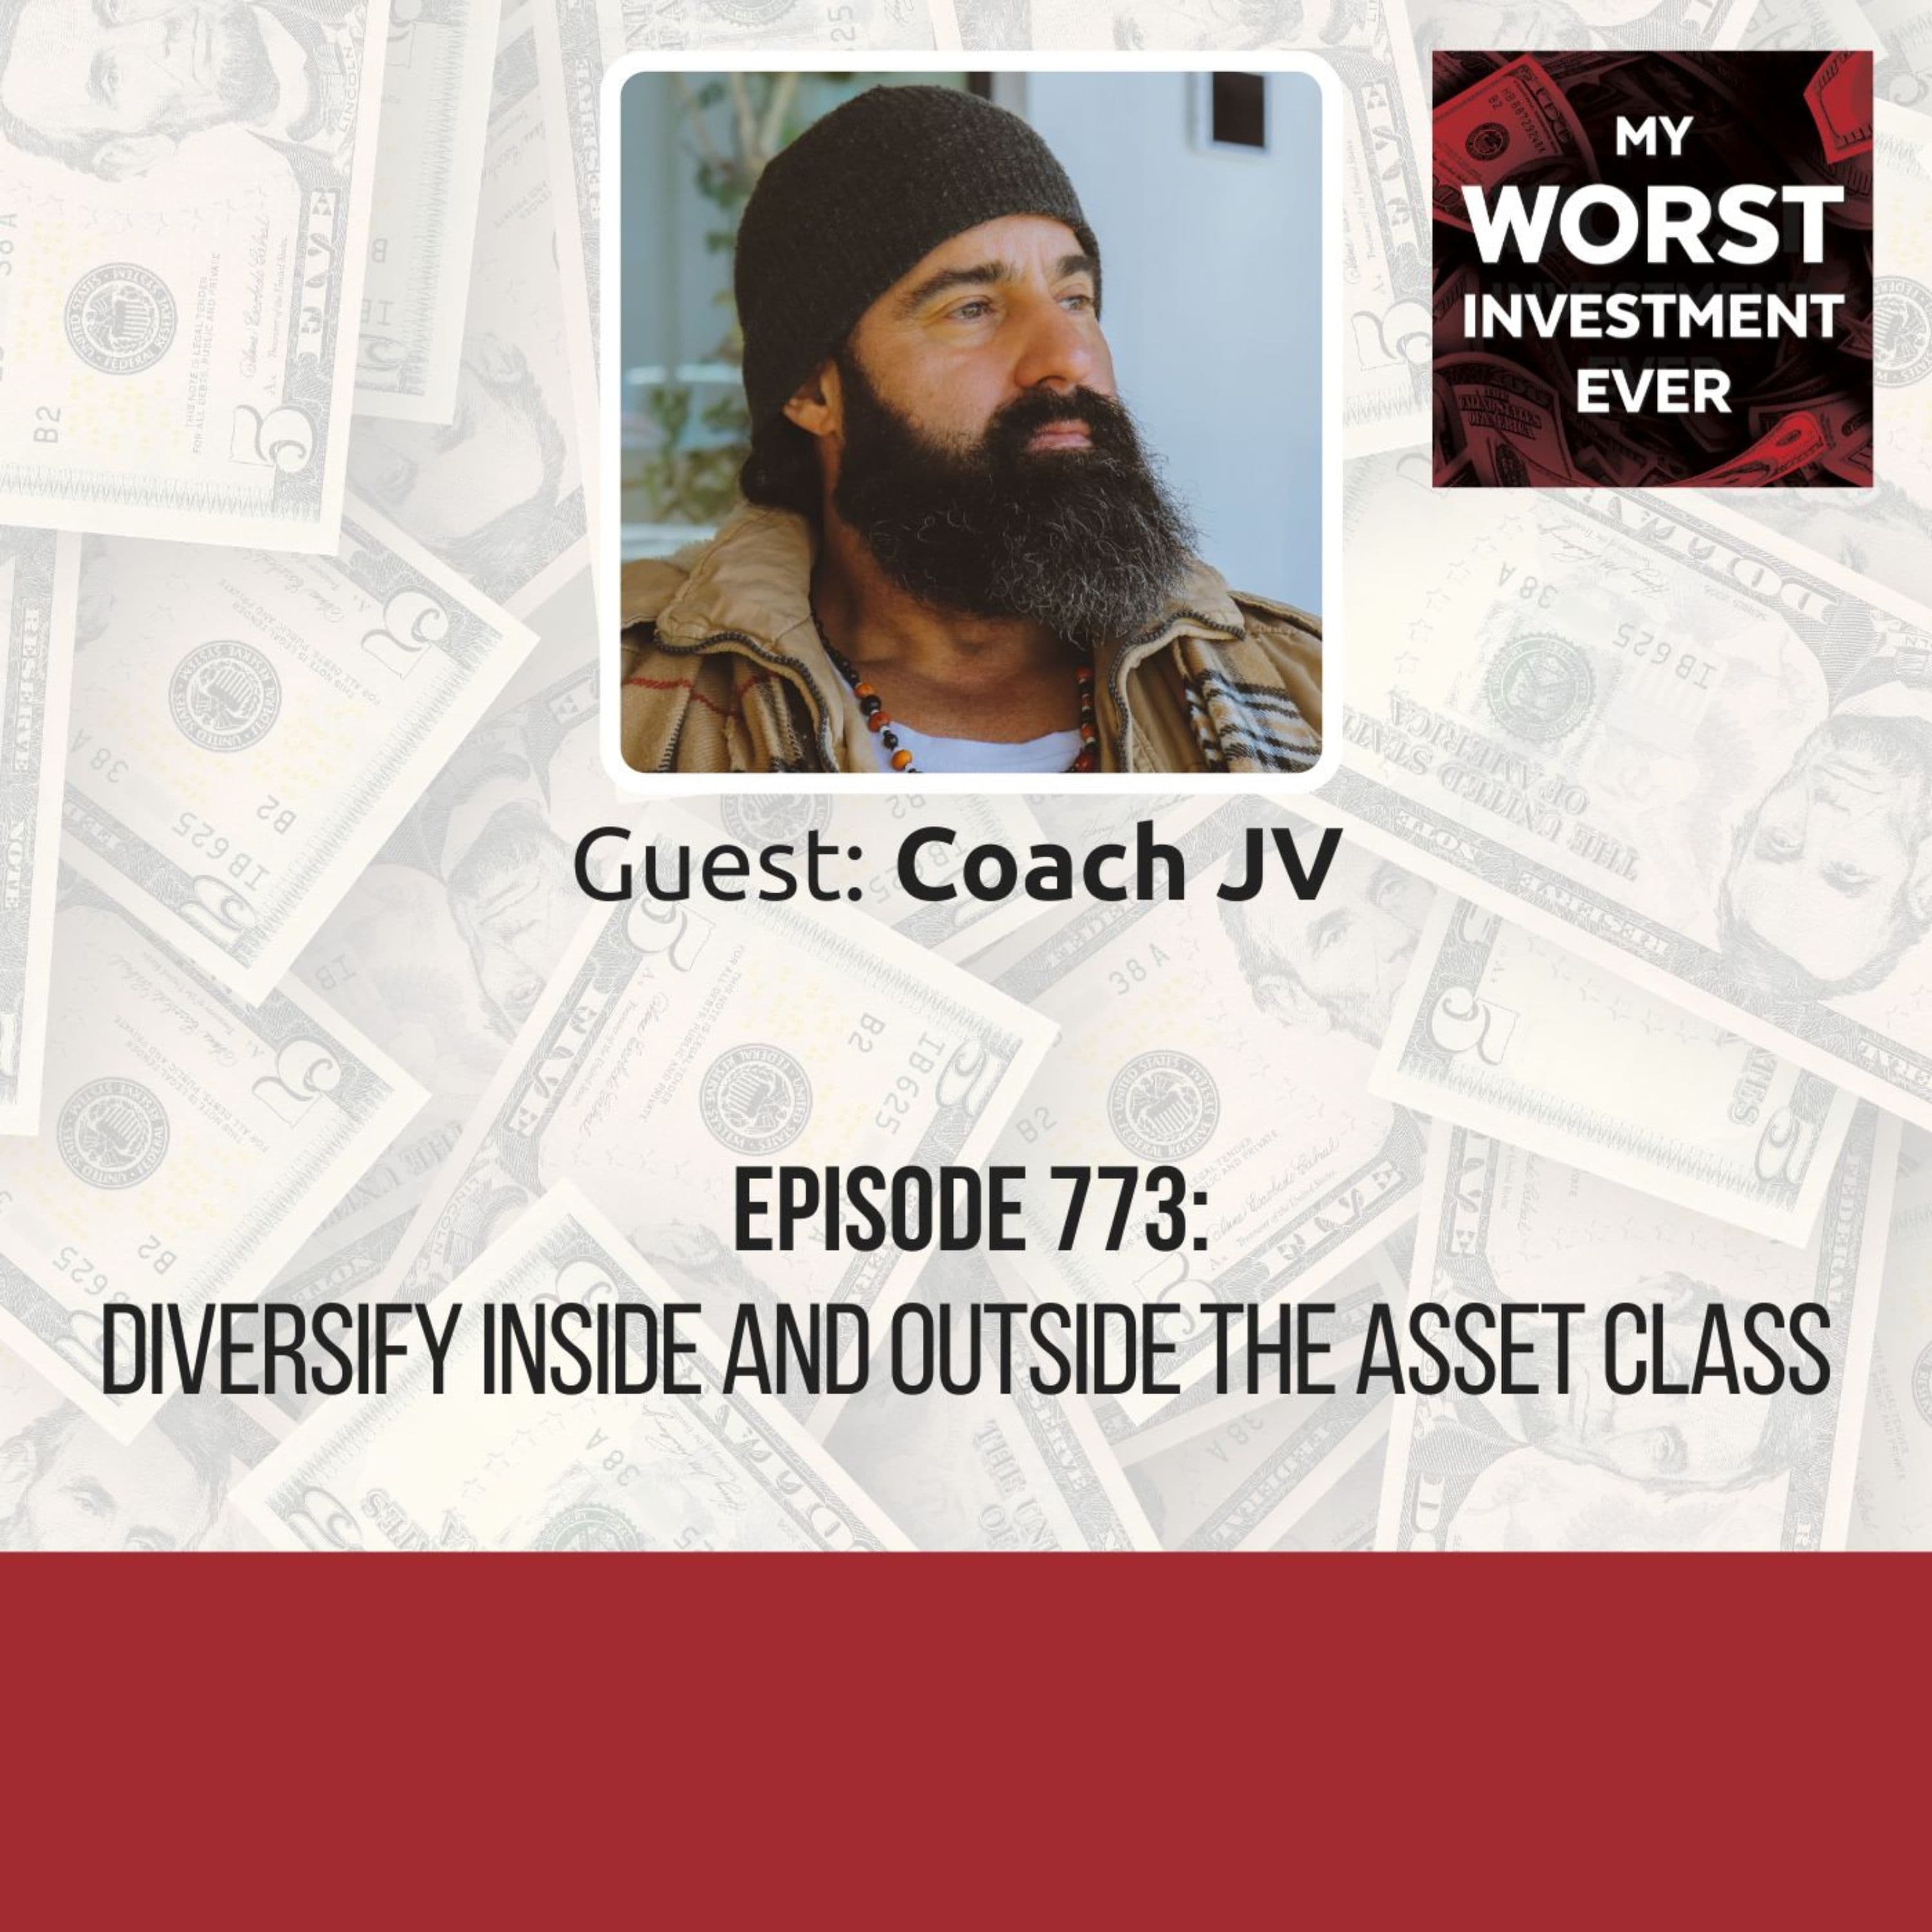 Coach JV - Diversify Inside and Outside the Asset Class